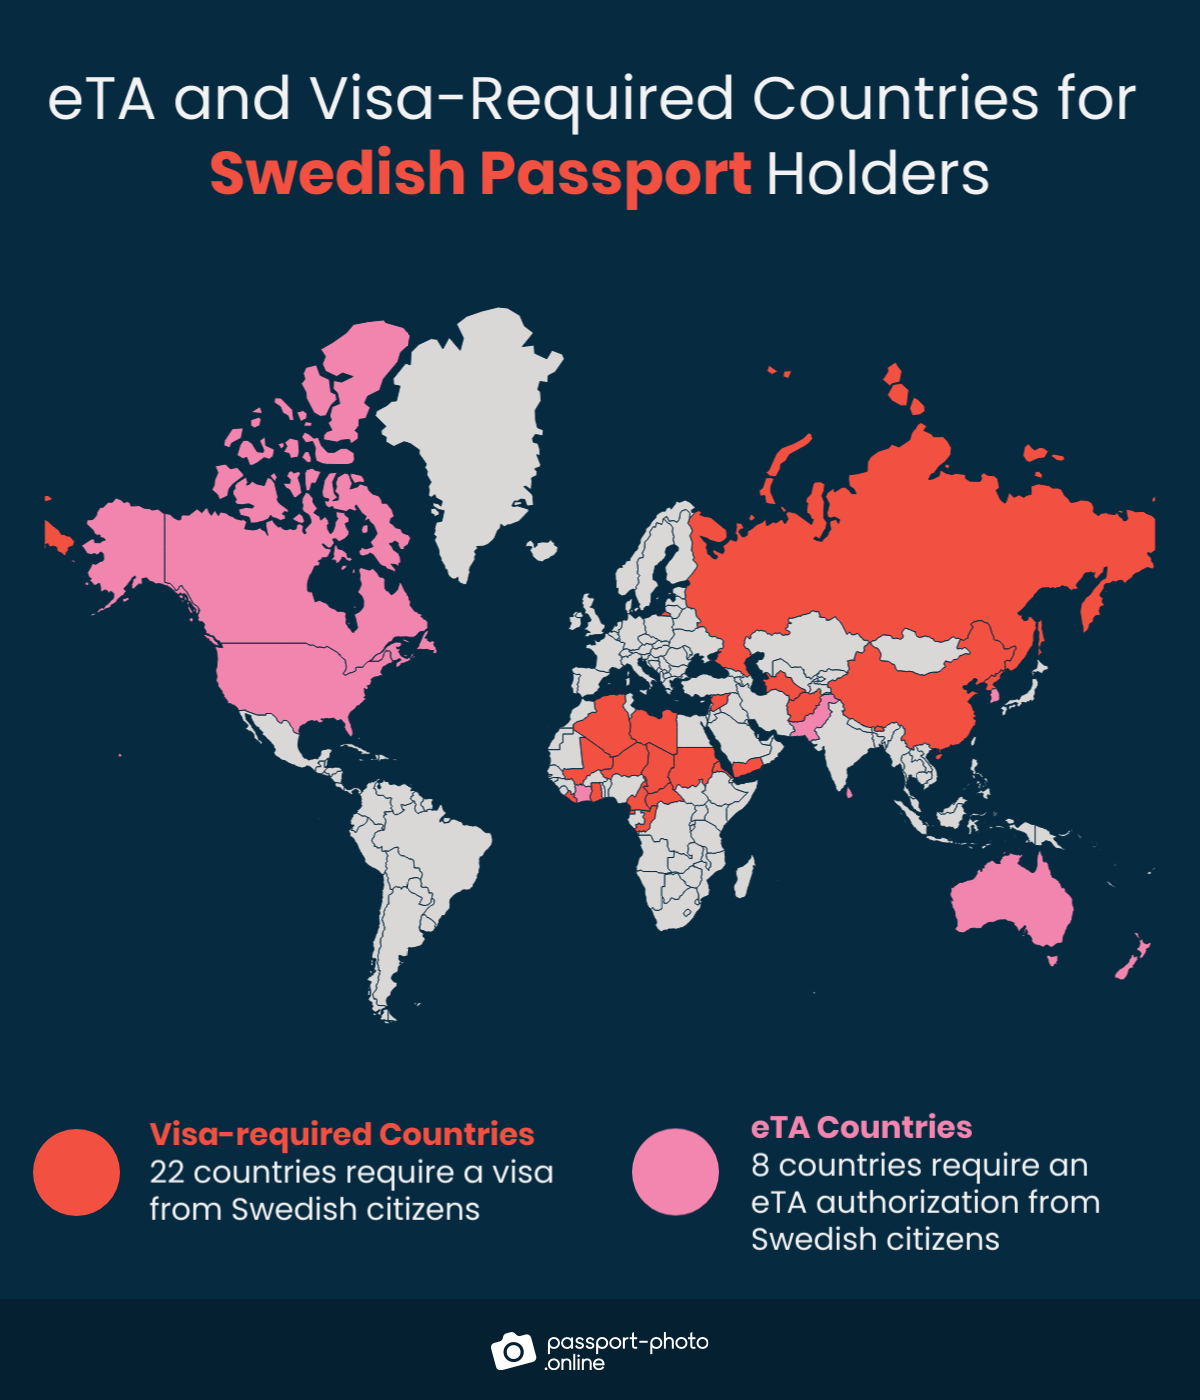 Visa requirements for Swedish citizens